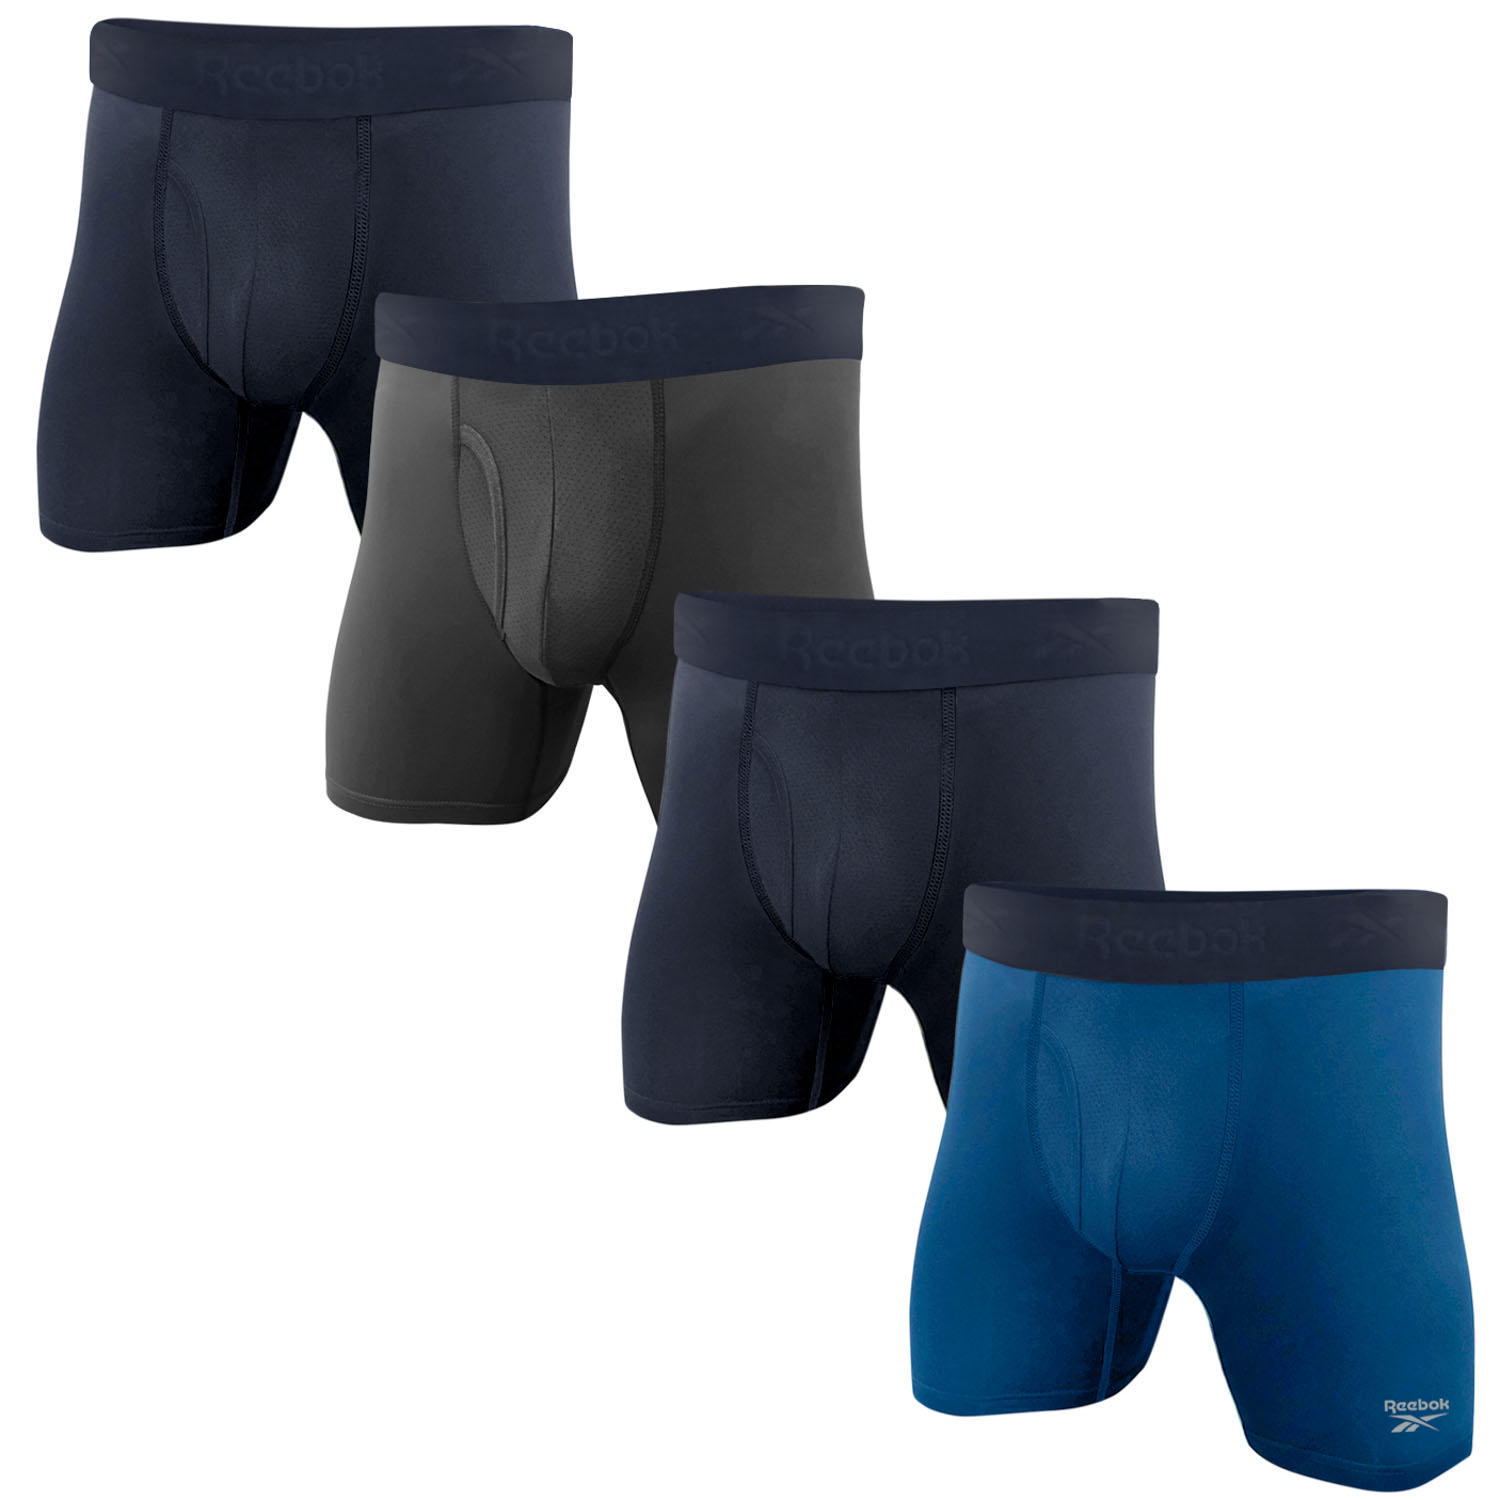 Reebok Mens 4 Pack Performance Boxer Briefs with Comfort Pouch - Navy/Grey/Navy/Blue Large